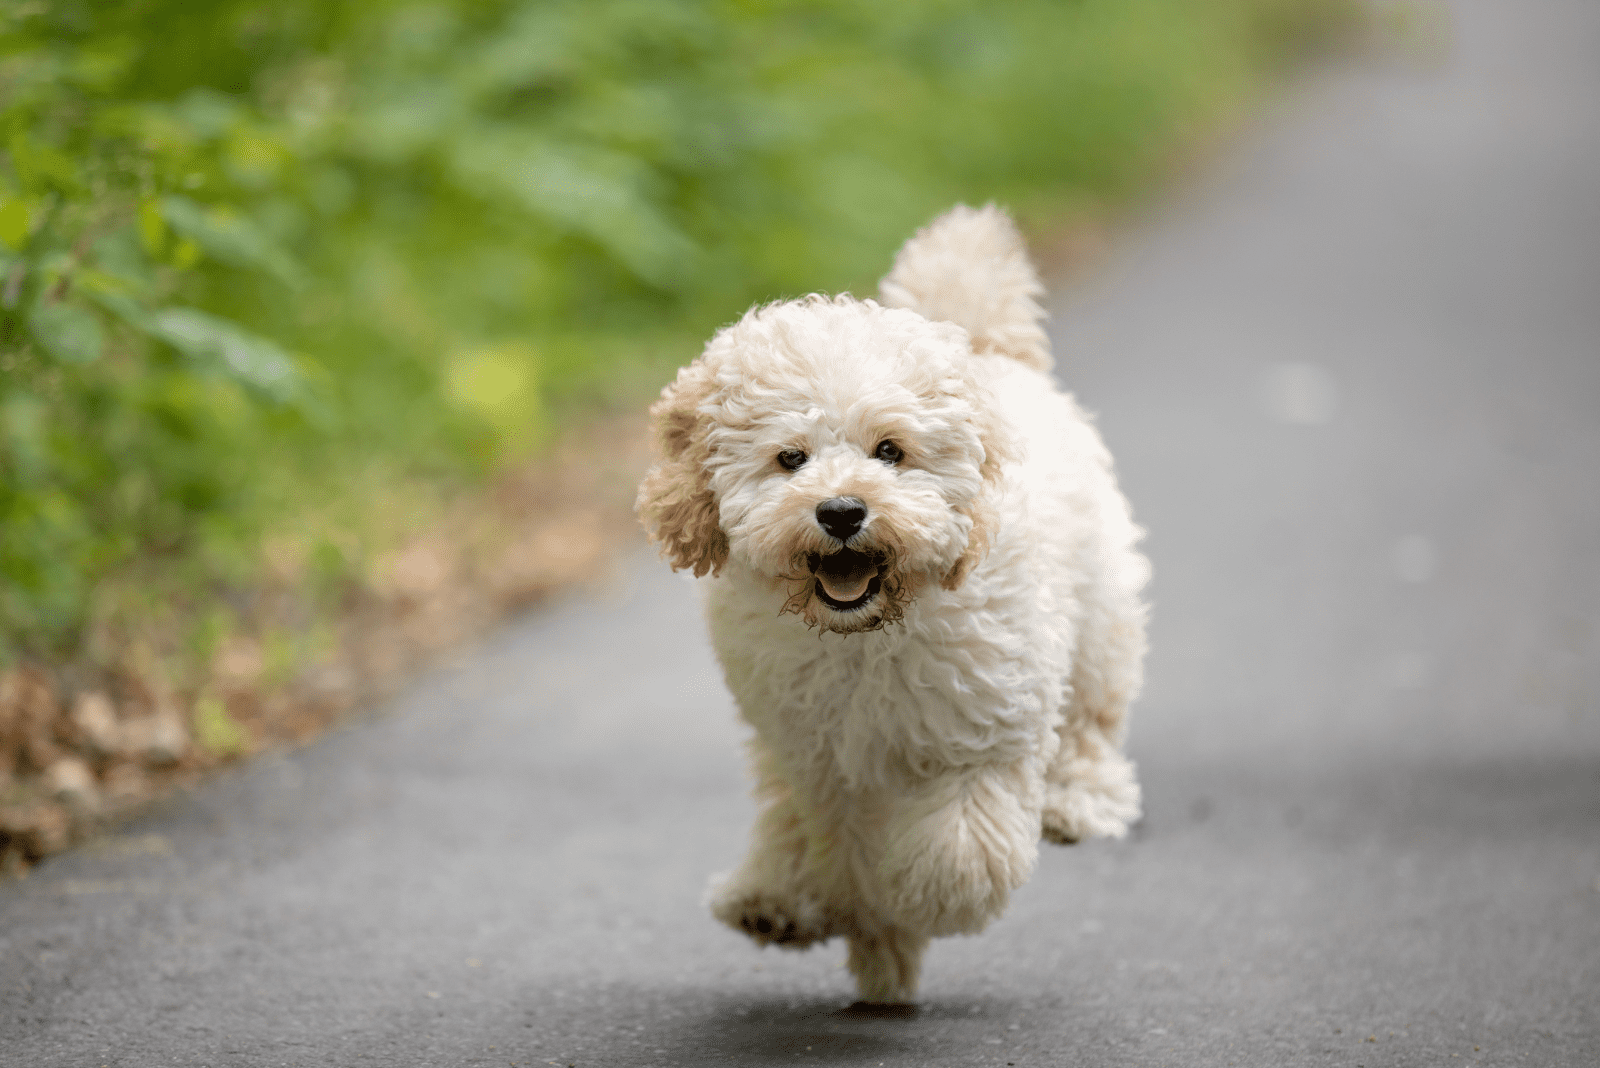 adorable Maltipoo running on the road